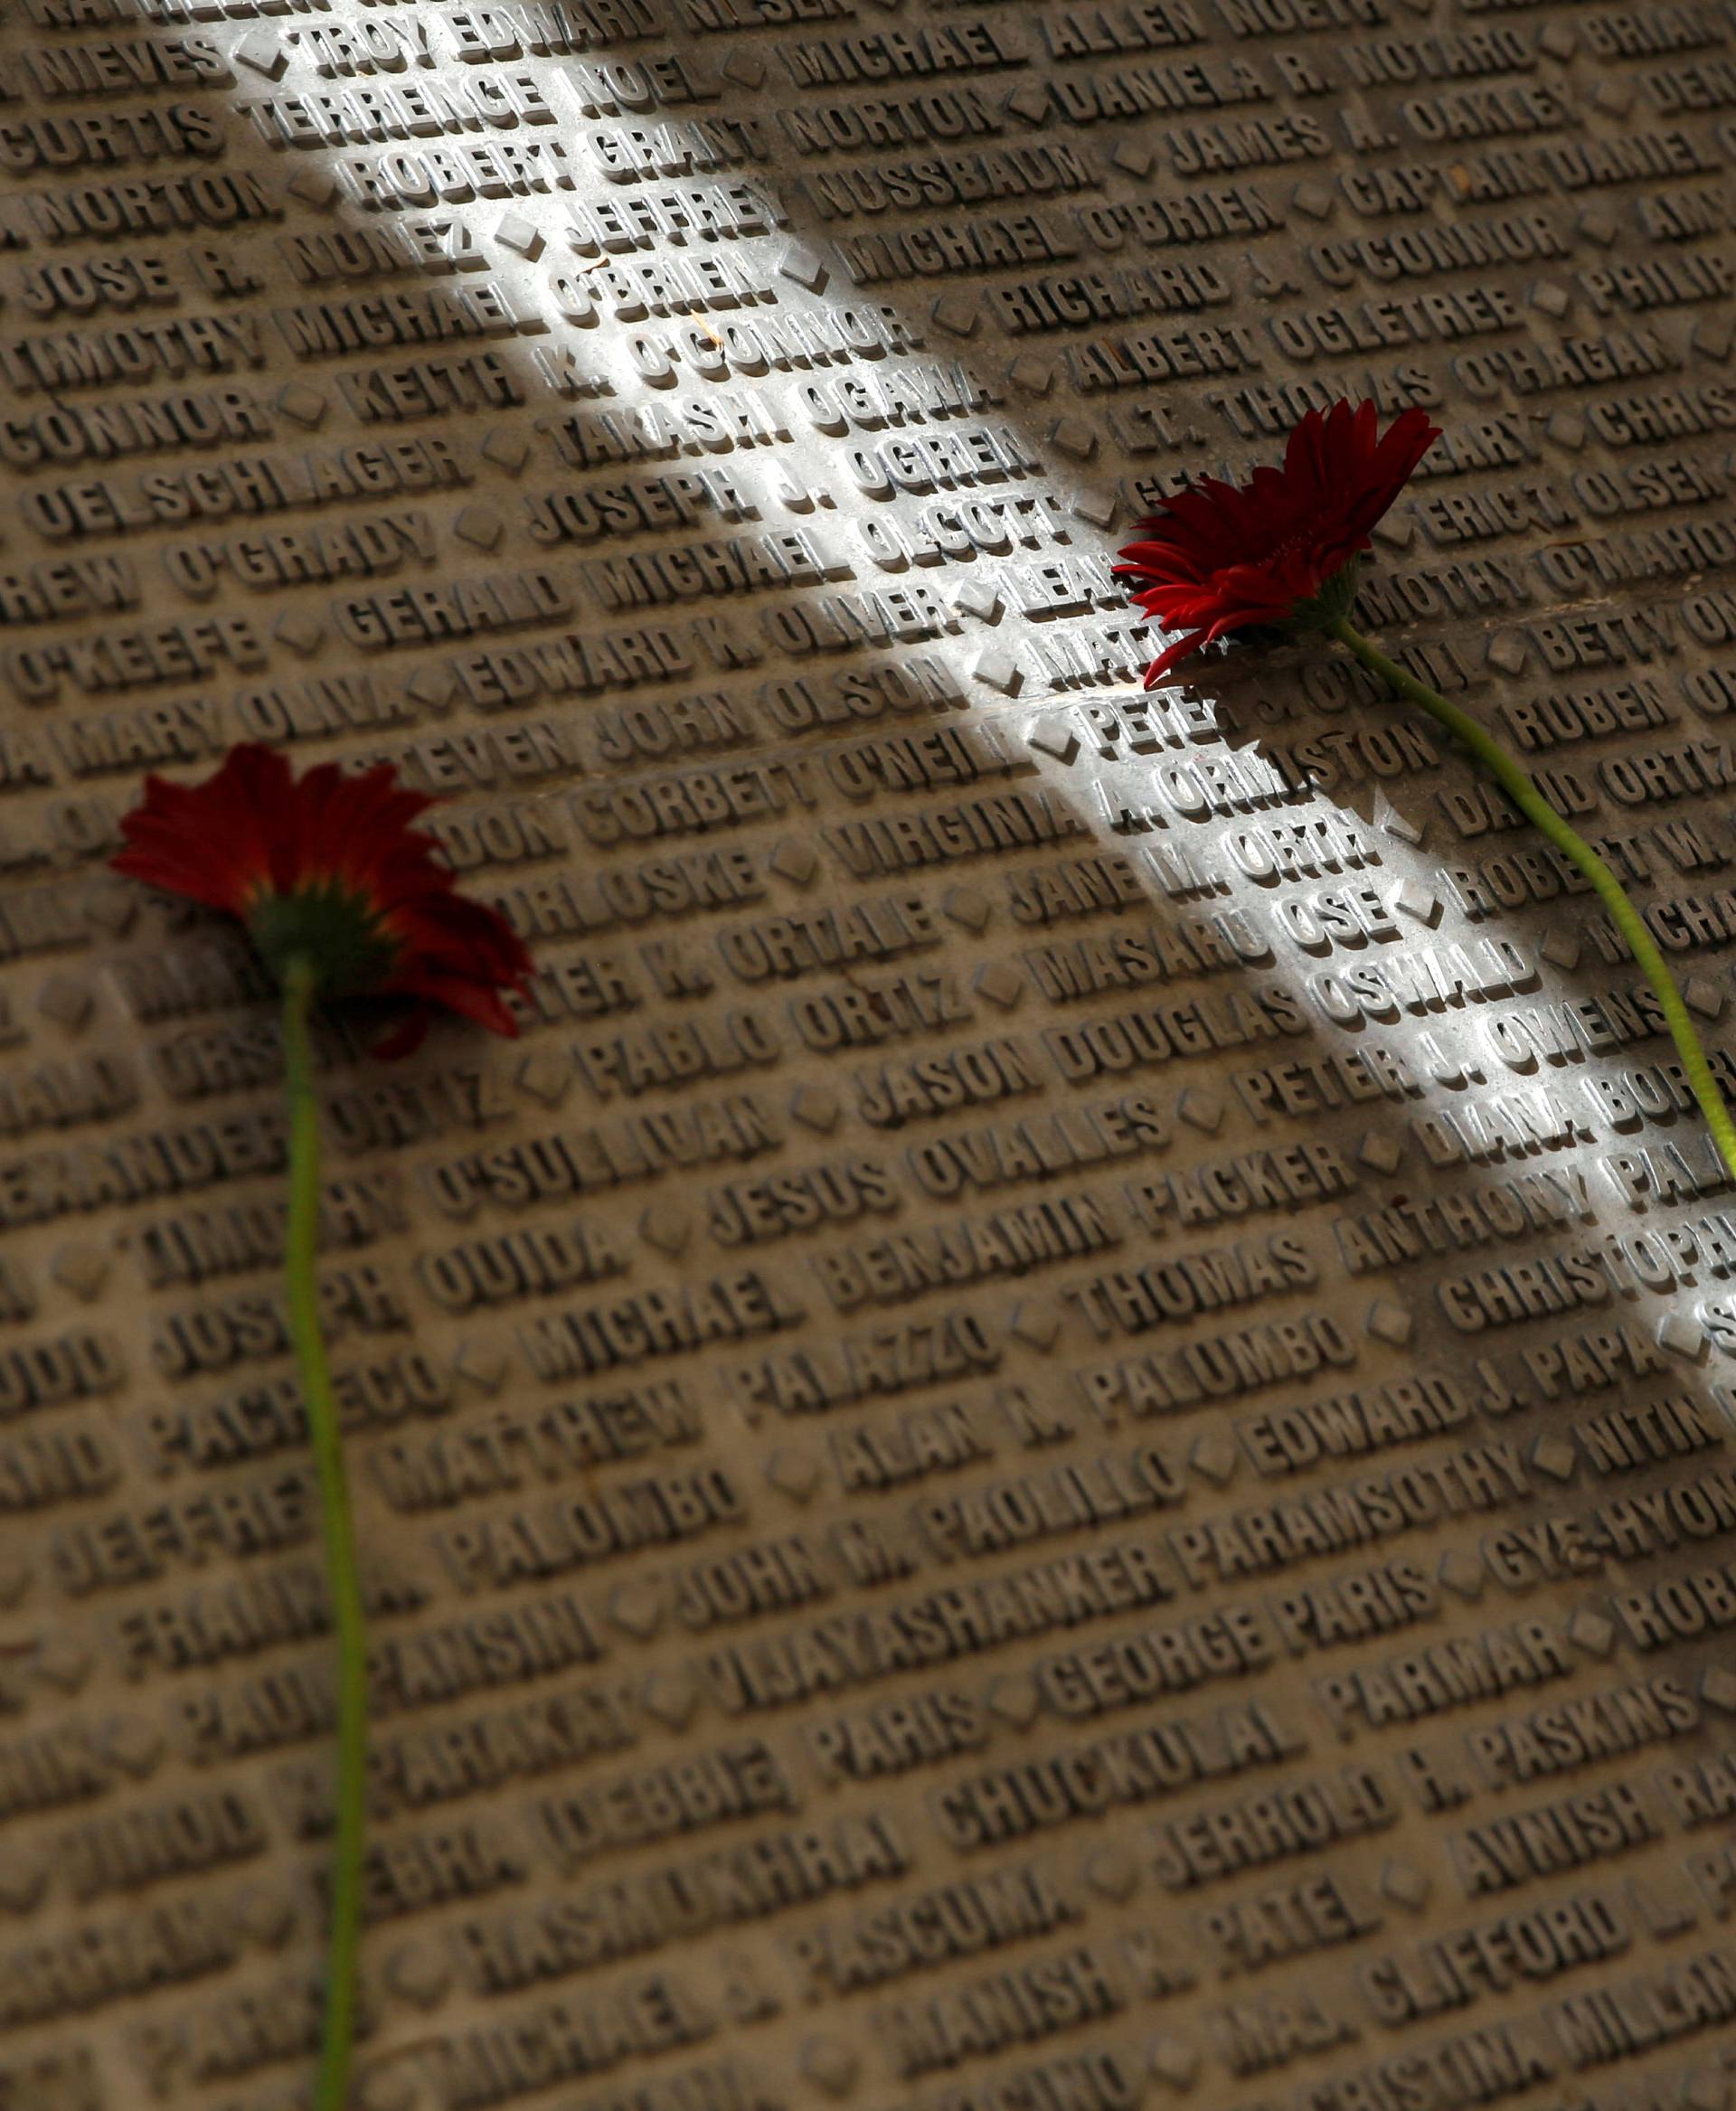 A man lays a flower on a monument engraved with names of victims of the September 11th attacks, during a memorial event marking the 15th anniversary of September 11, 2001 attacks in the U.S., at the 9/11 Living Memorial Plaza in Jerusalem